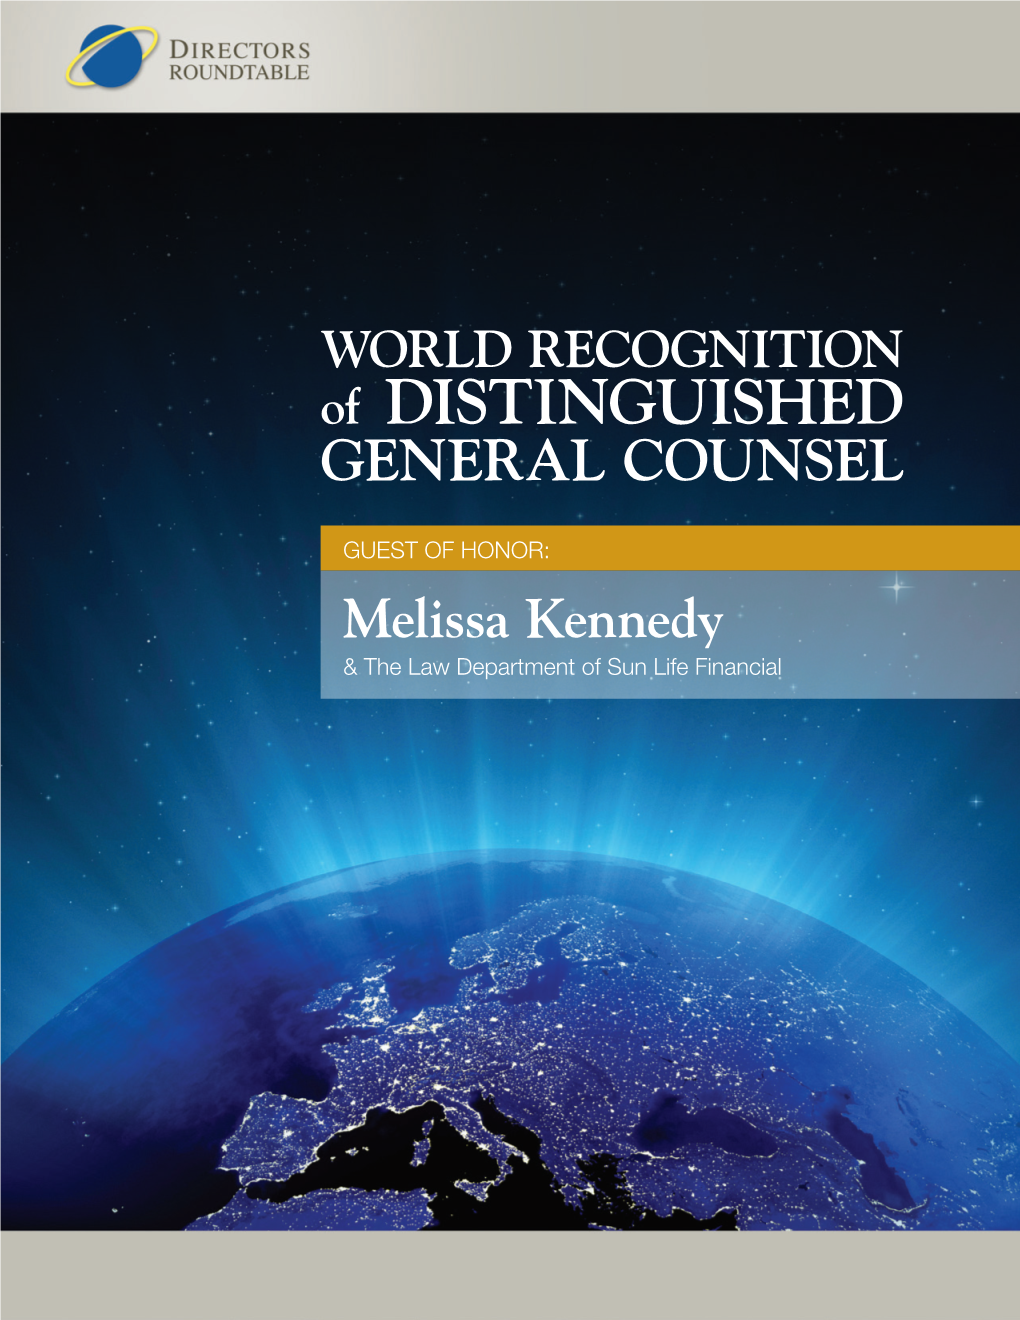 Of DISTINGUISHED GENERAL COUNSEL